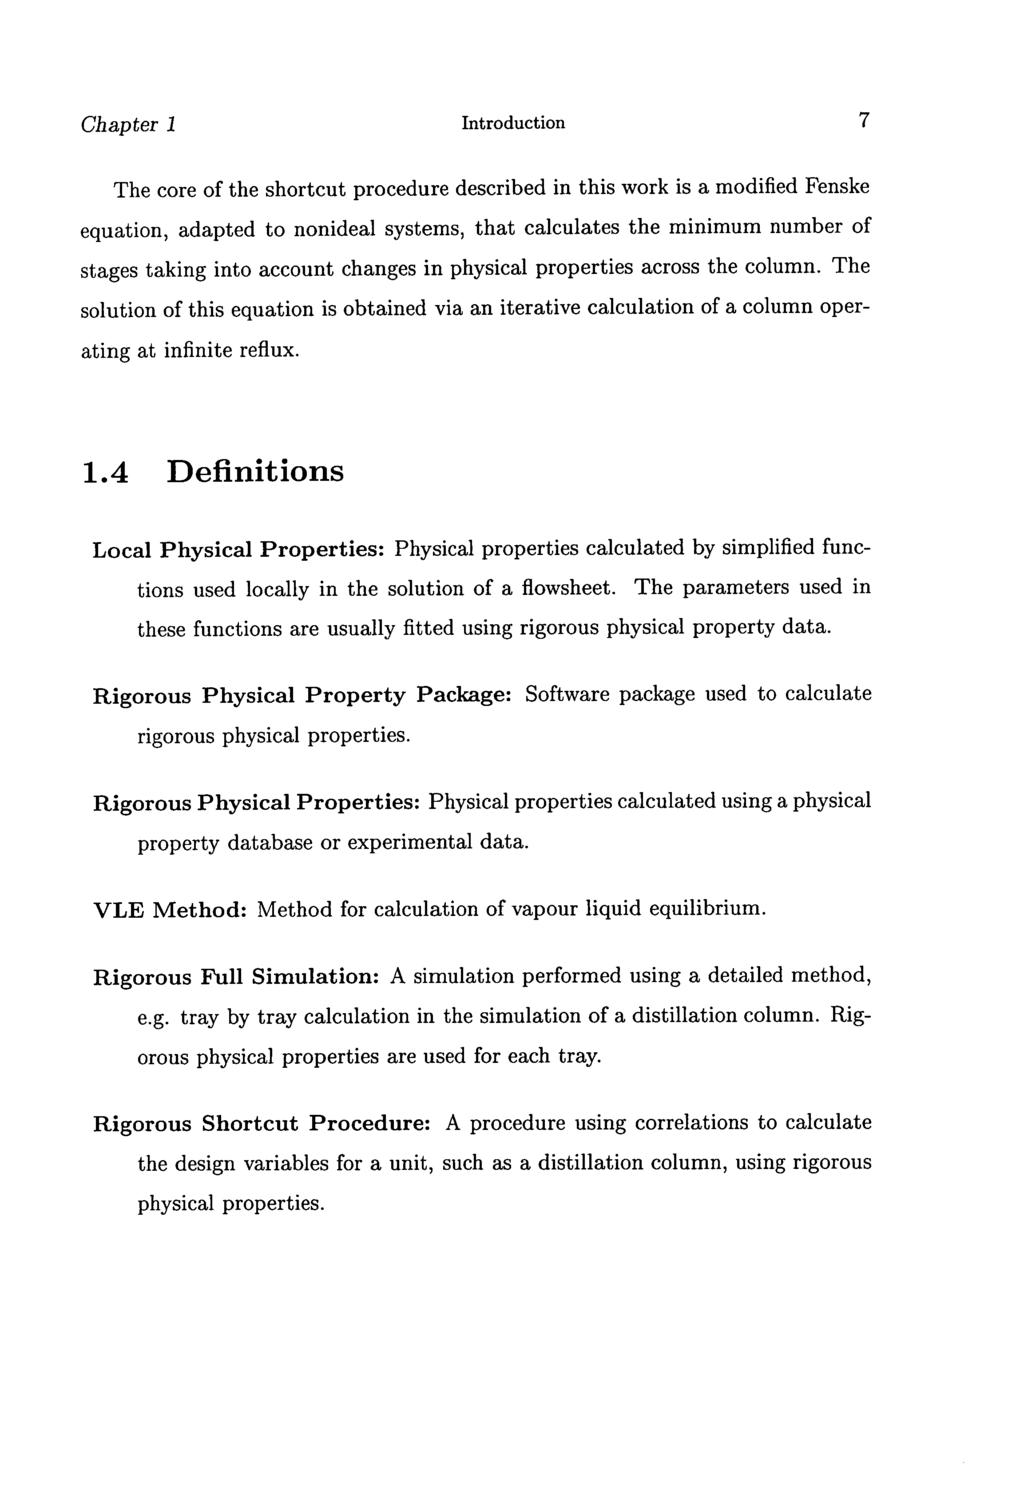 Chapter 1 Introduction 7 The core of the shortcut procedure described in this work is a modified Fenske equation, adapted to nonideal systems, that calculates the minimum number of stages taking into